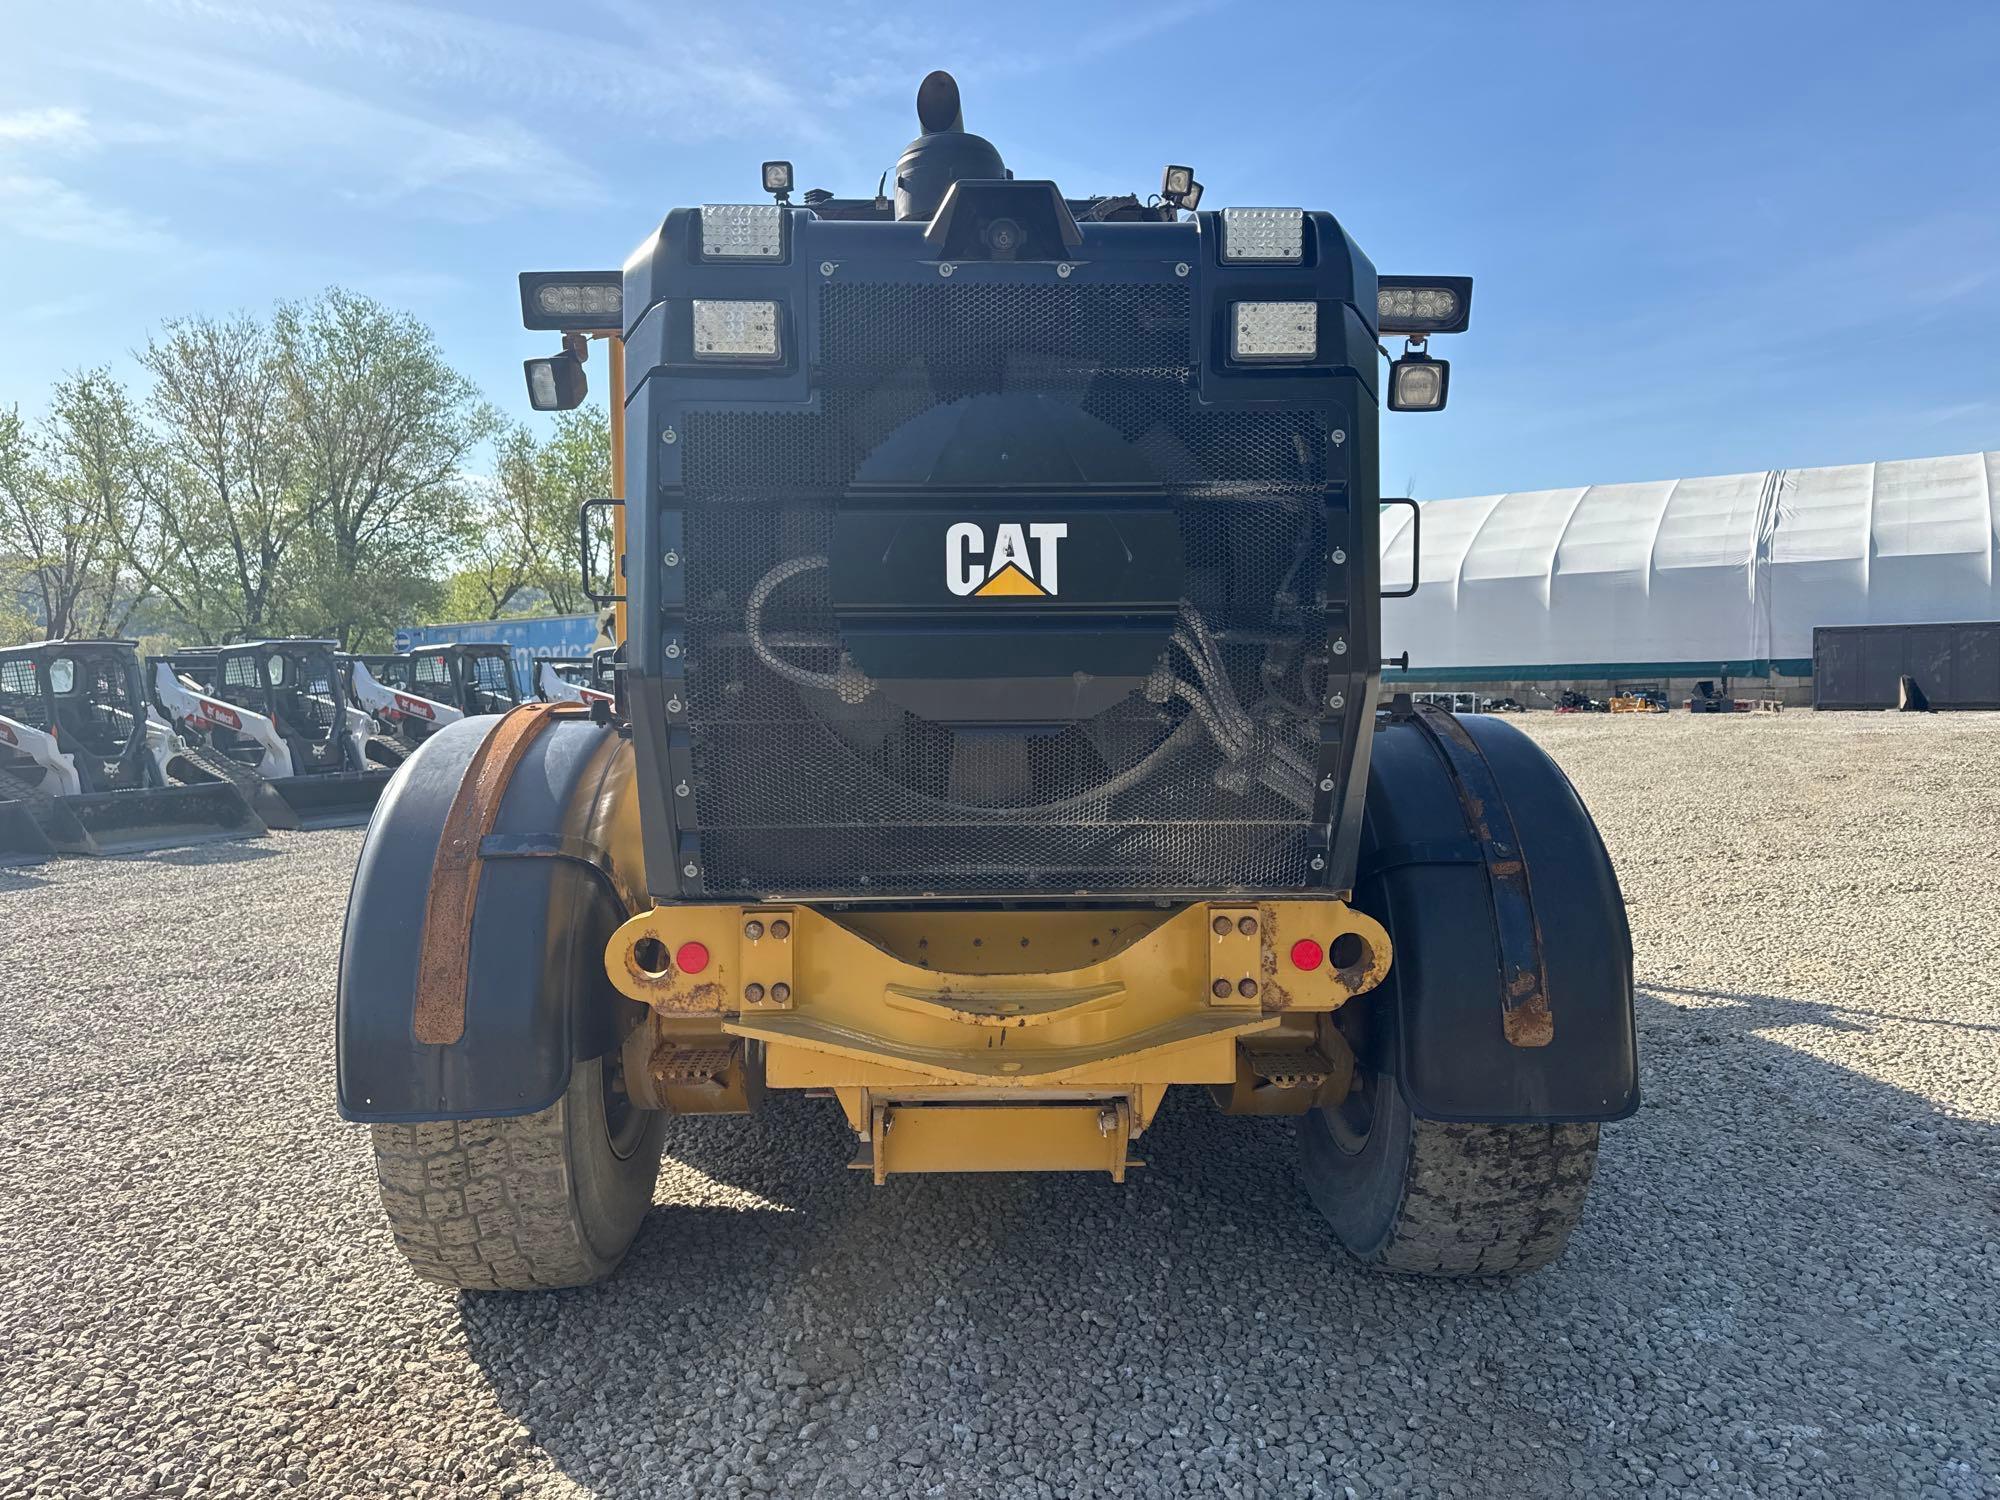 2018 CAT 140M3 MOTOR GRADER SN:N9D00831 powered by Cat diesel engine, equipped with EROPS, air,